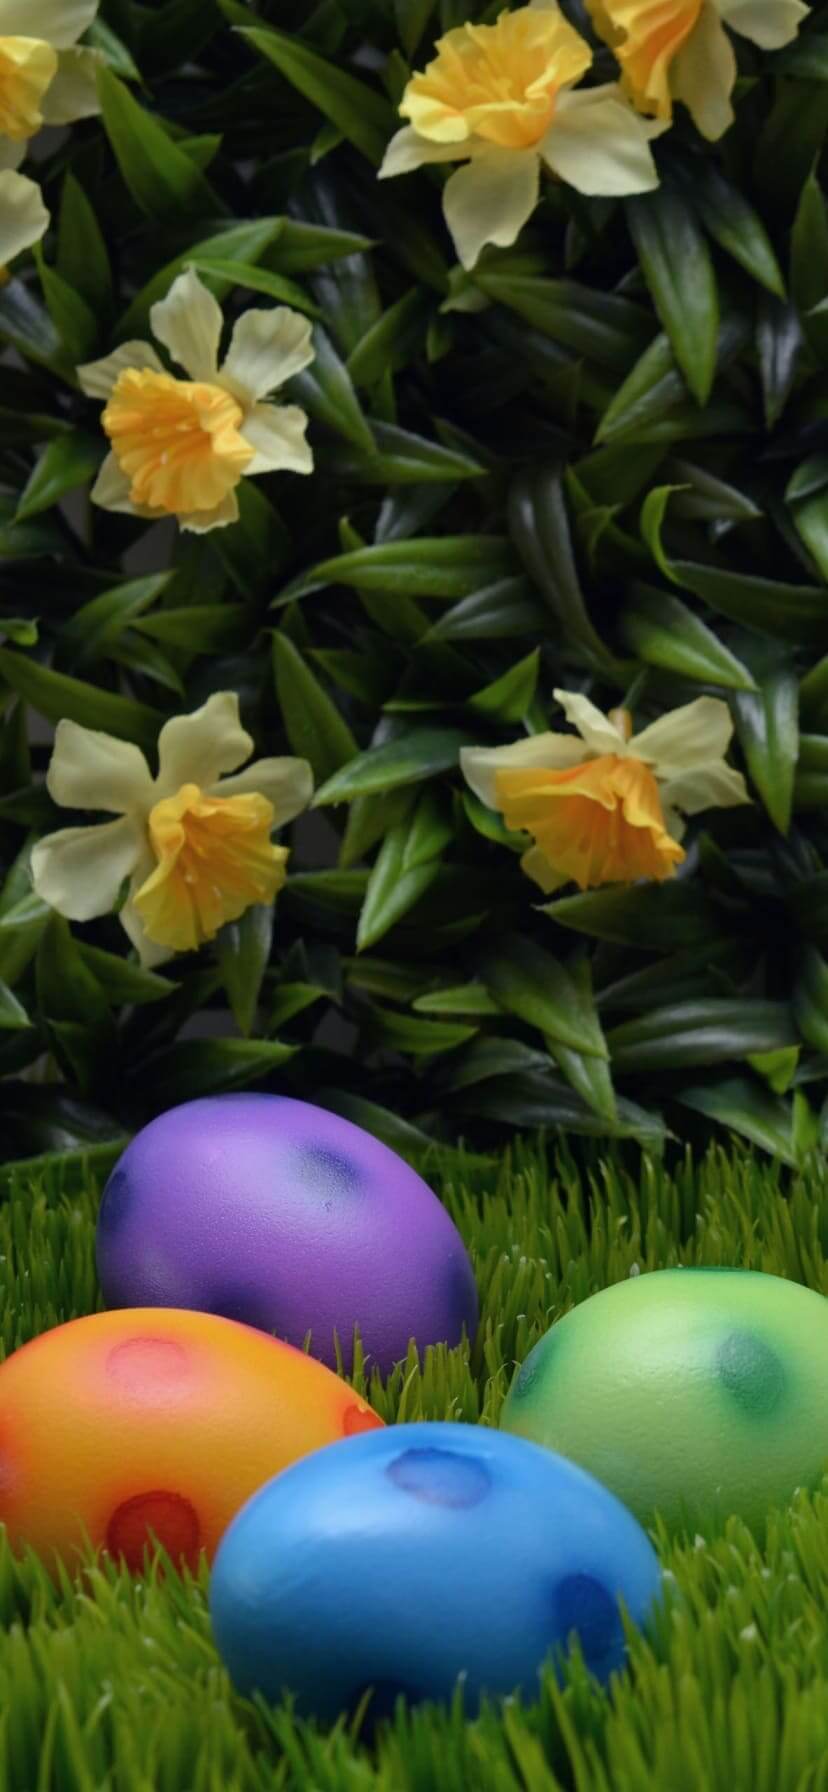 4K Easter Wallpaper iPhone 13 pro max, Best iPhone Wallpaper and iPhone background, WallpaperUpdate, Best iPhone Wallpaper and iPhone background